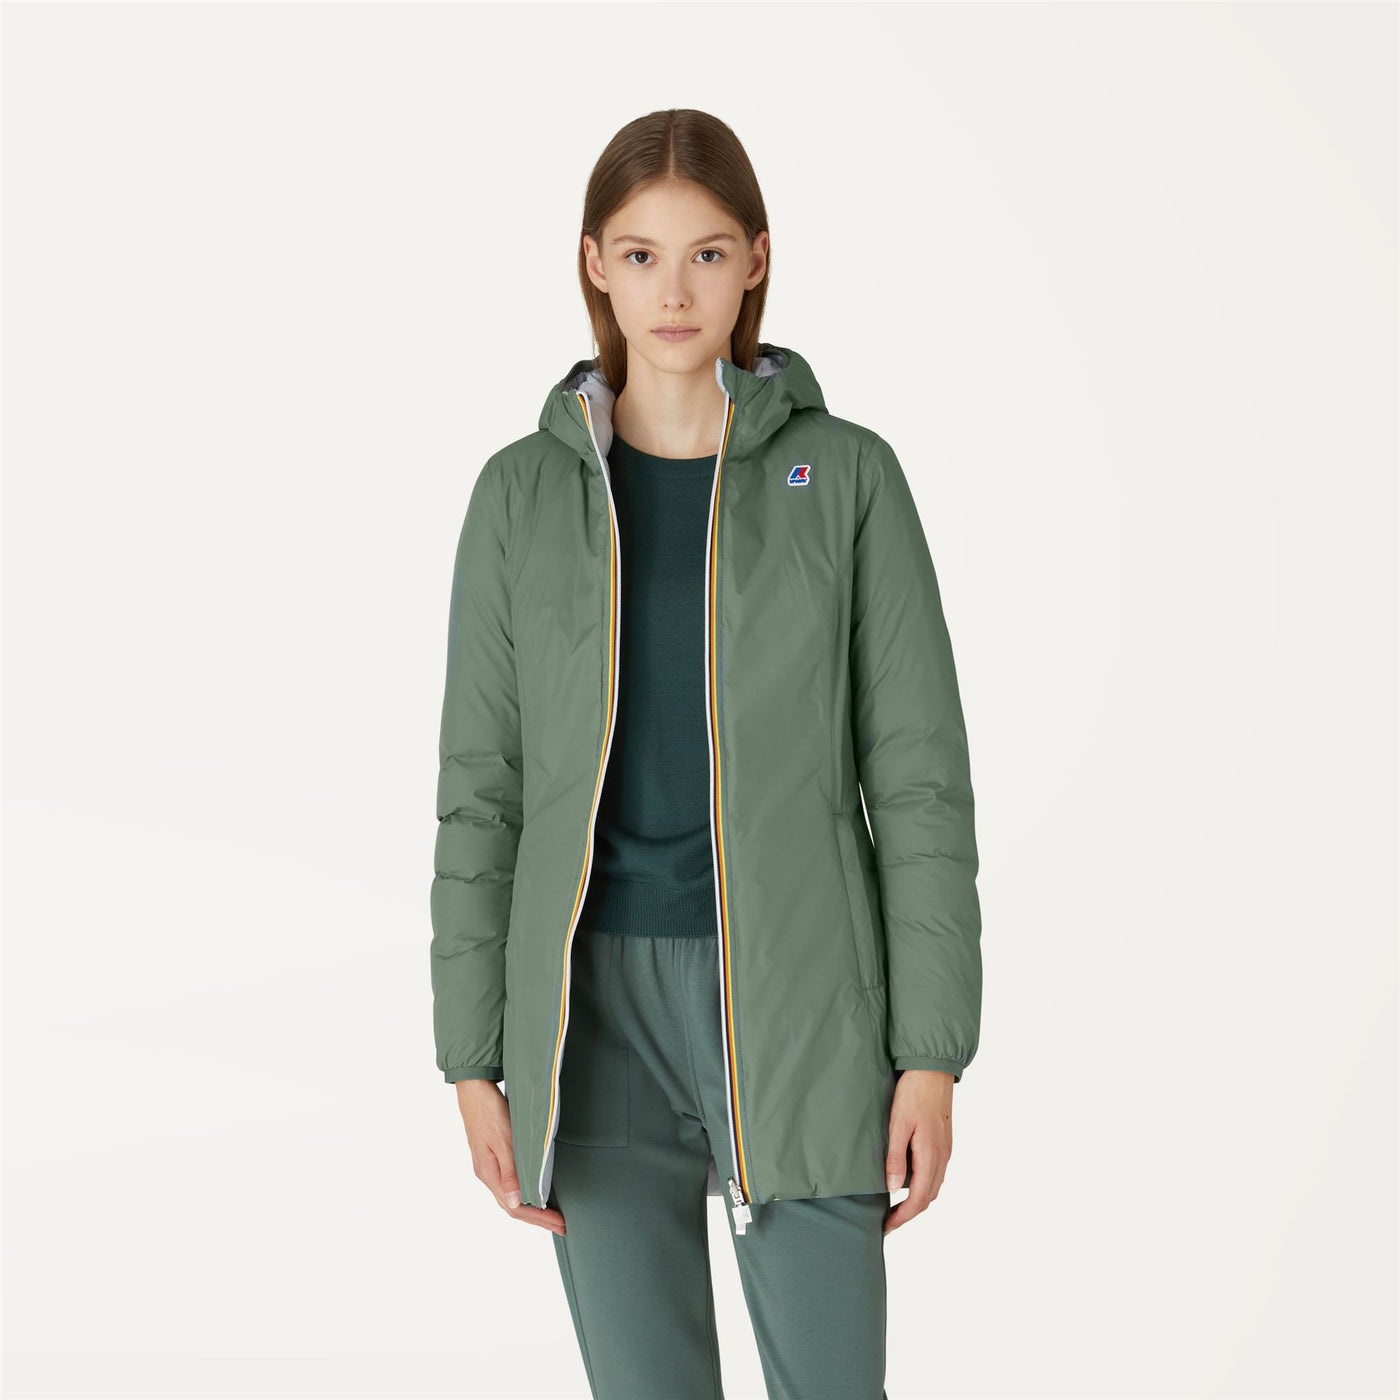 Jackets Woman DENISE THERMO PLUS.2 DOUBLE 3/4 Length GREEN LAUREL - GREY LT | kway Dressed Back (jpg Rgb)		